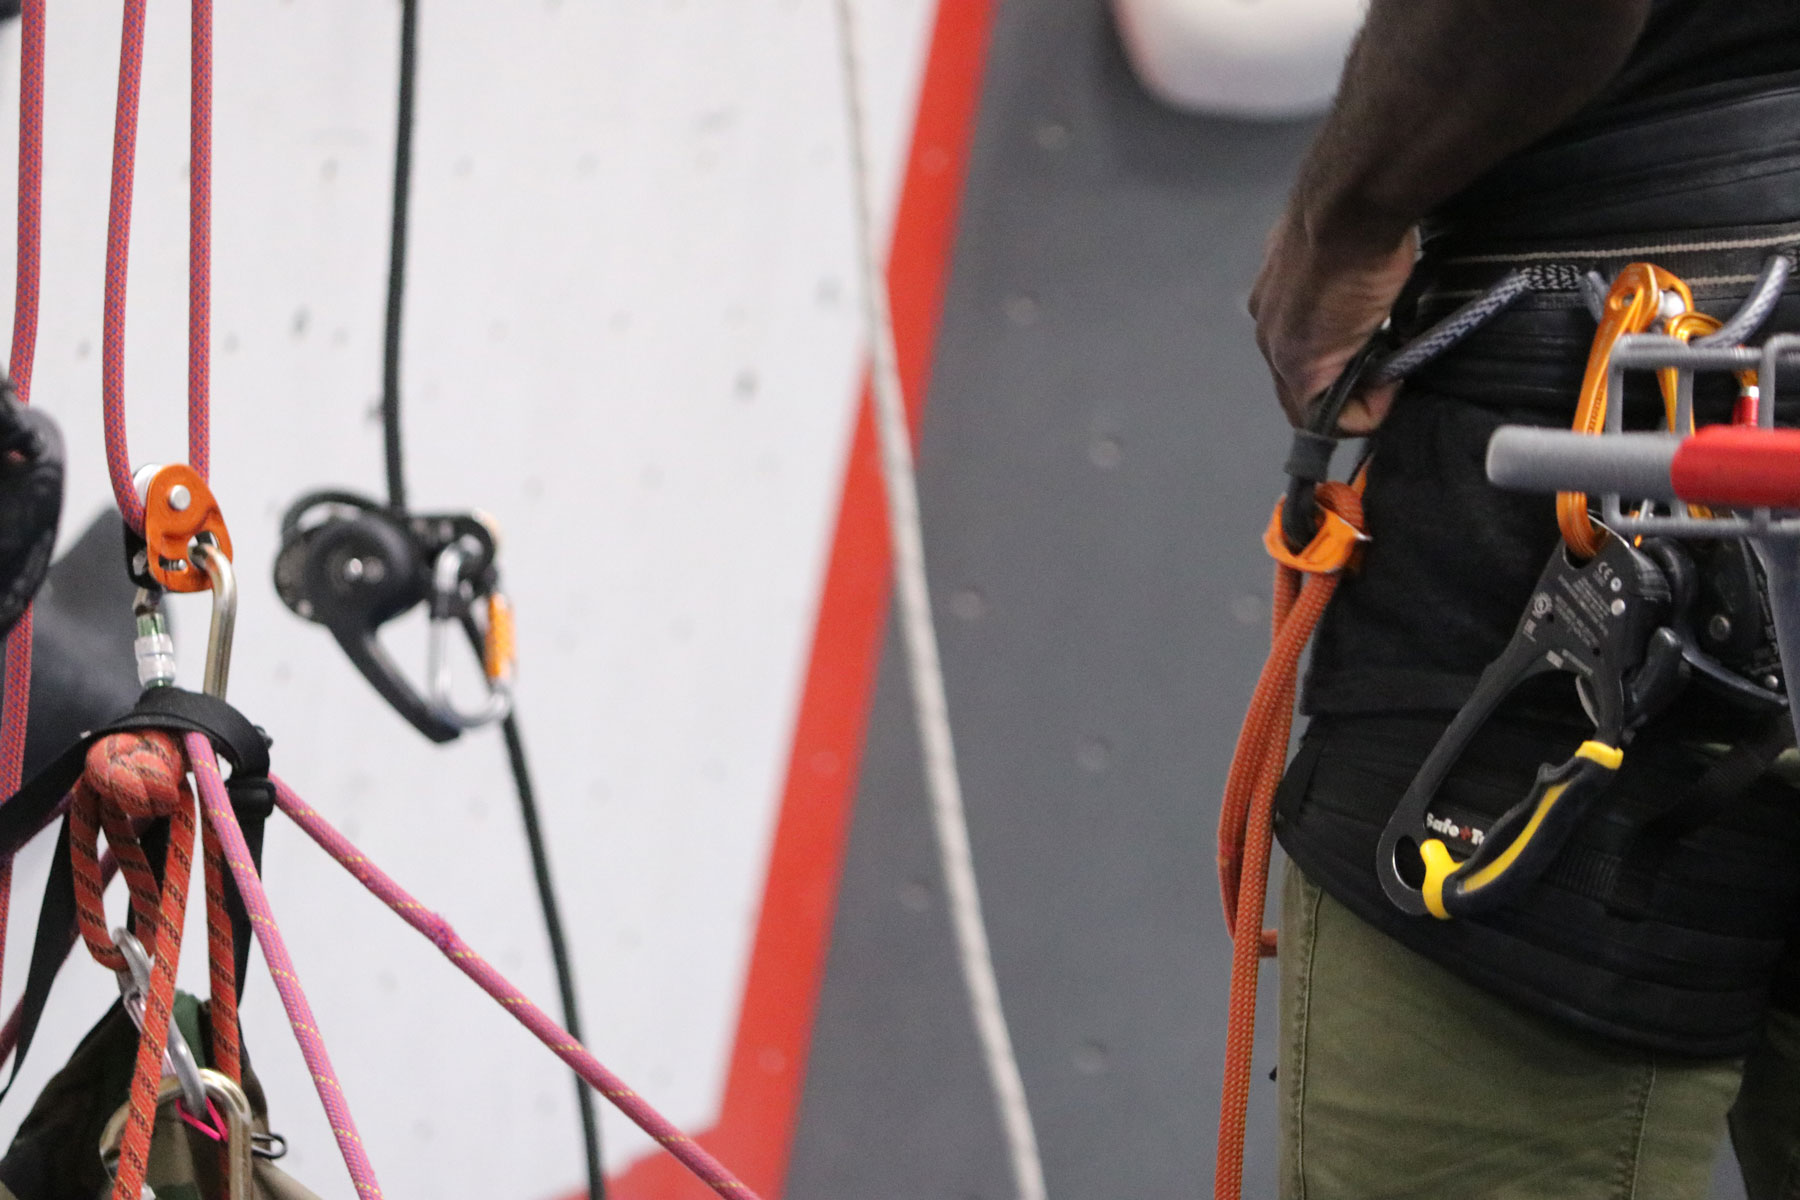 Aid Climbing, Foot Loops & Etriers, Rope Access Equipment